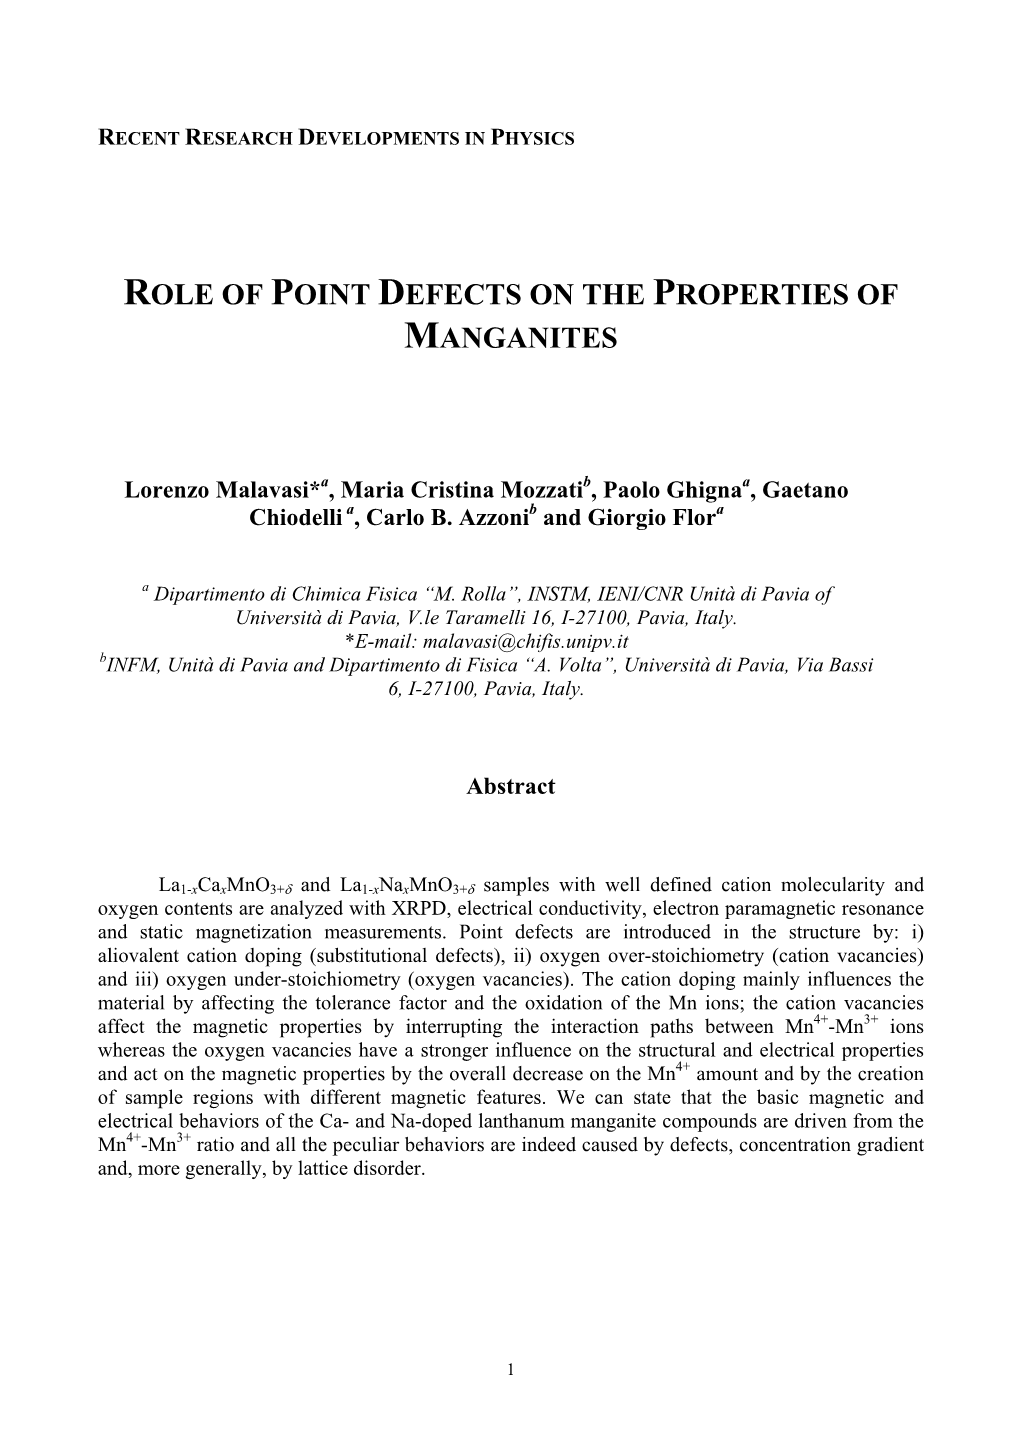 Role of Point Defects on the Properties of Manganites